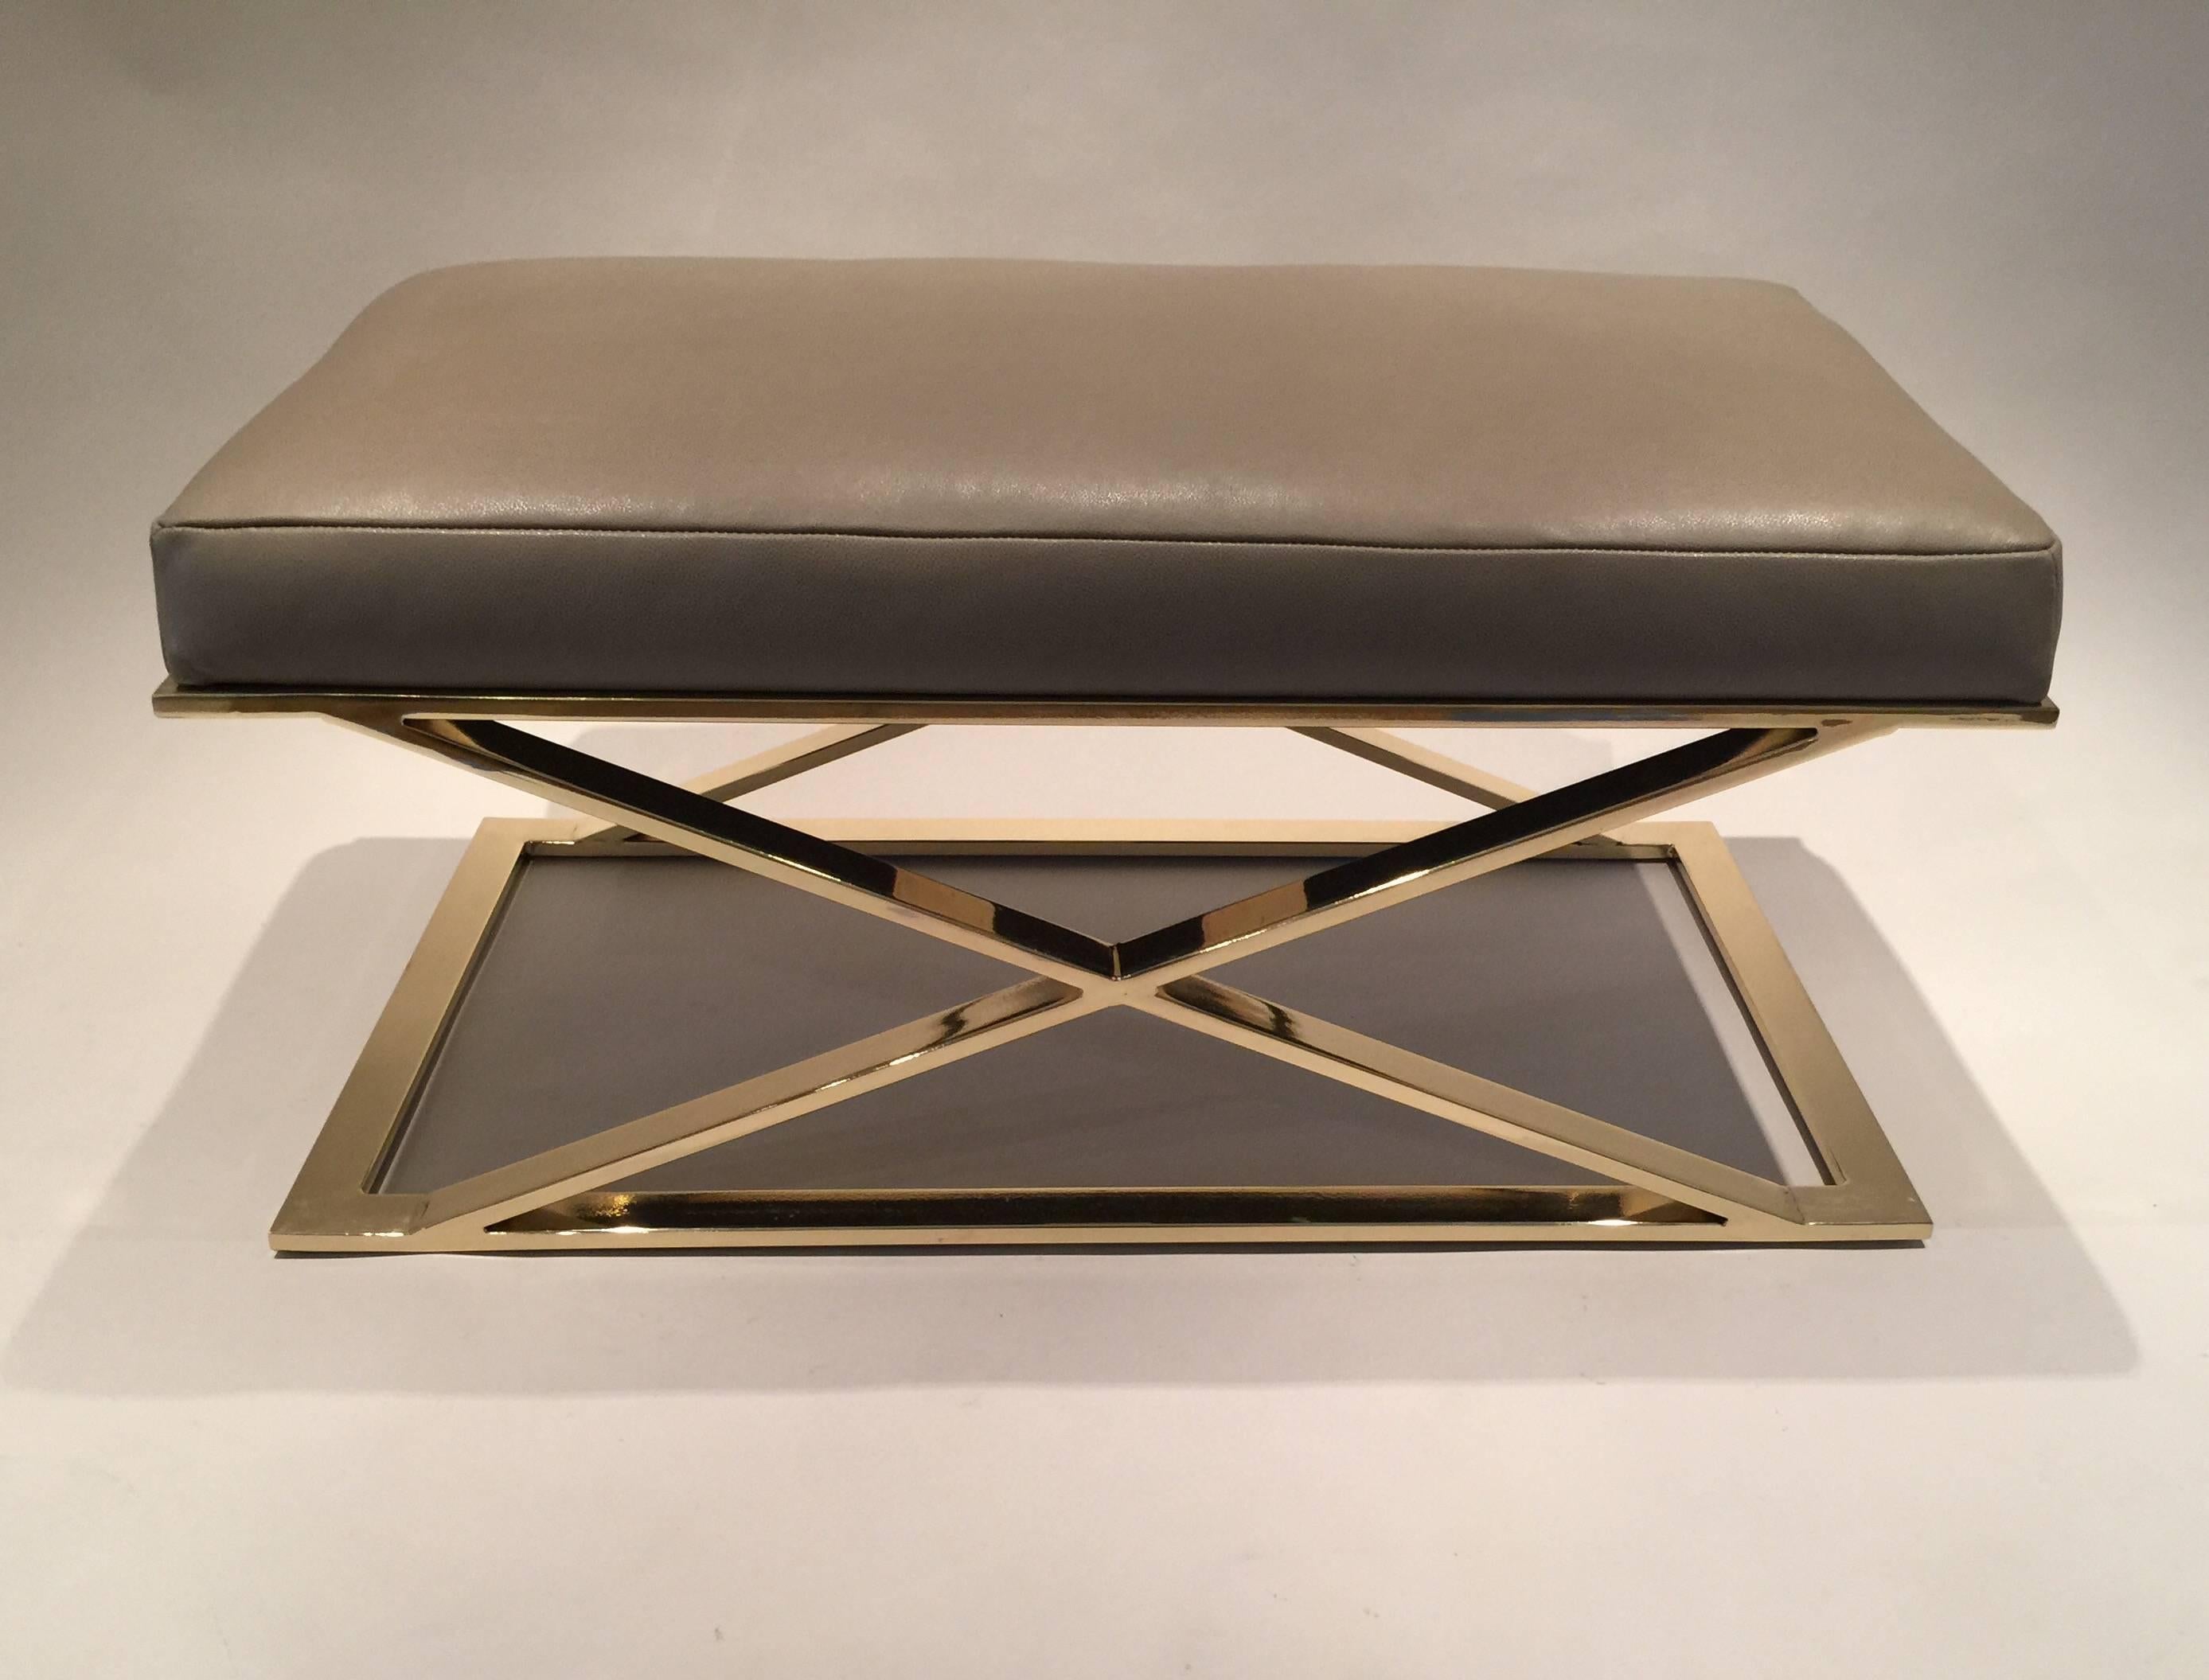 An X Frame Brass Plated Bench By Milo Baughman For Thayer Coggin, With A Newly Upholstered Gray Leather Seat